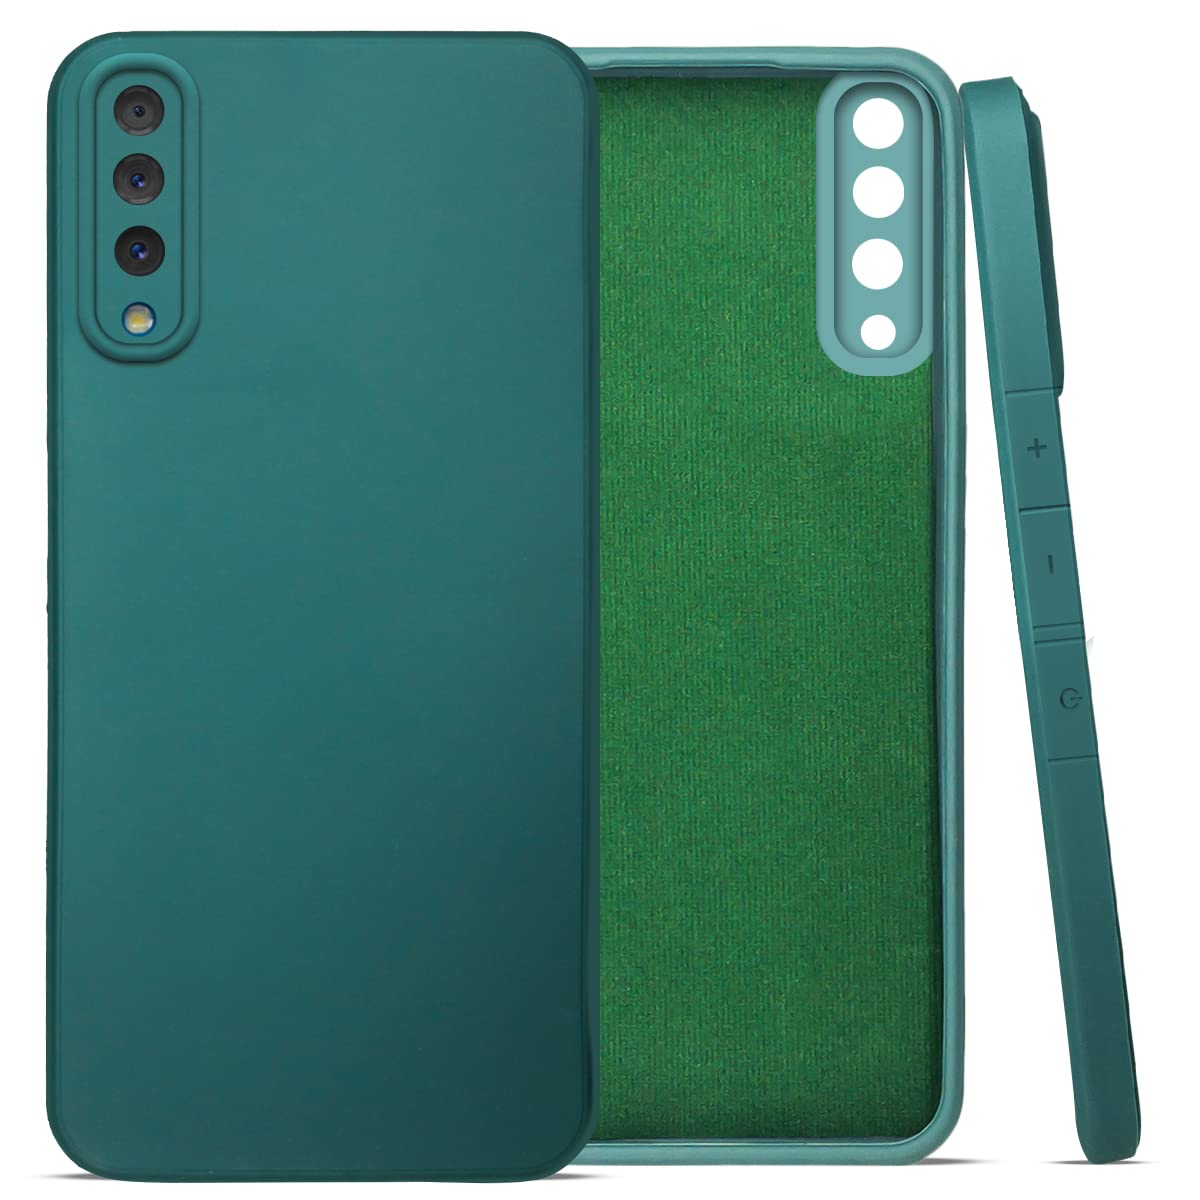 Samsung Galaxy A50-A50s Back Cover (Silicone + Inner Side Cloth)